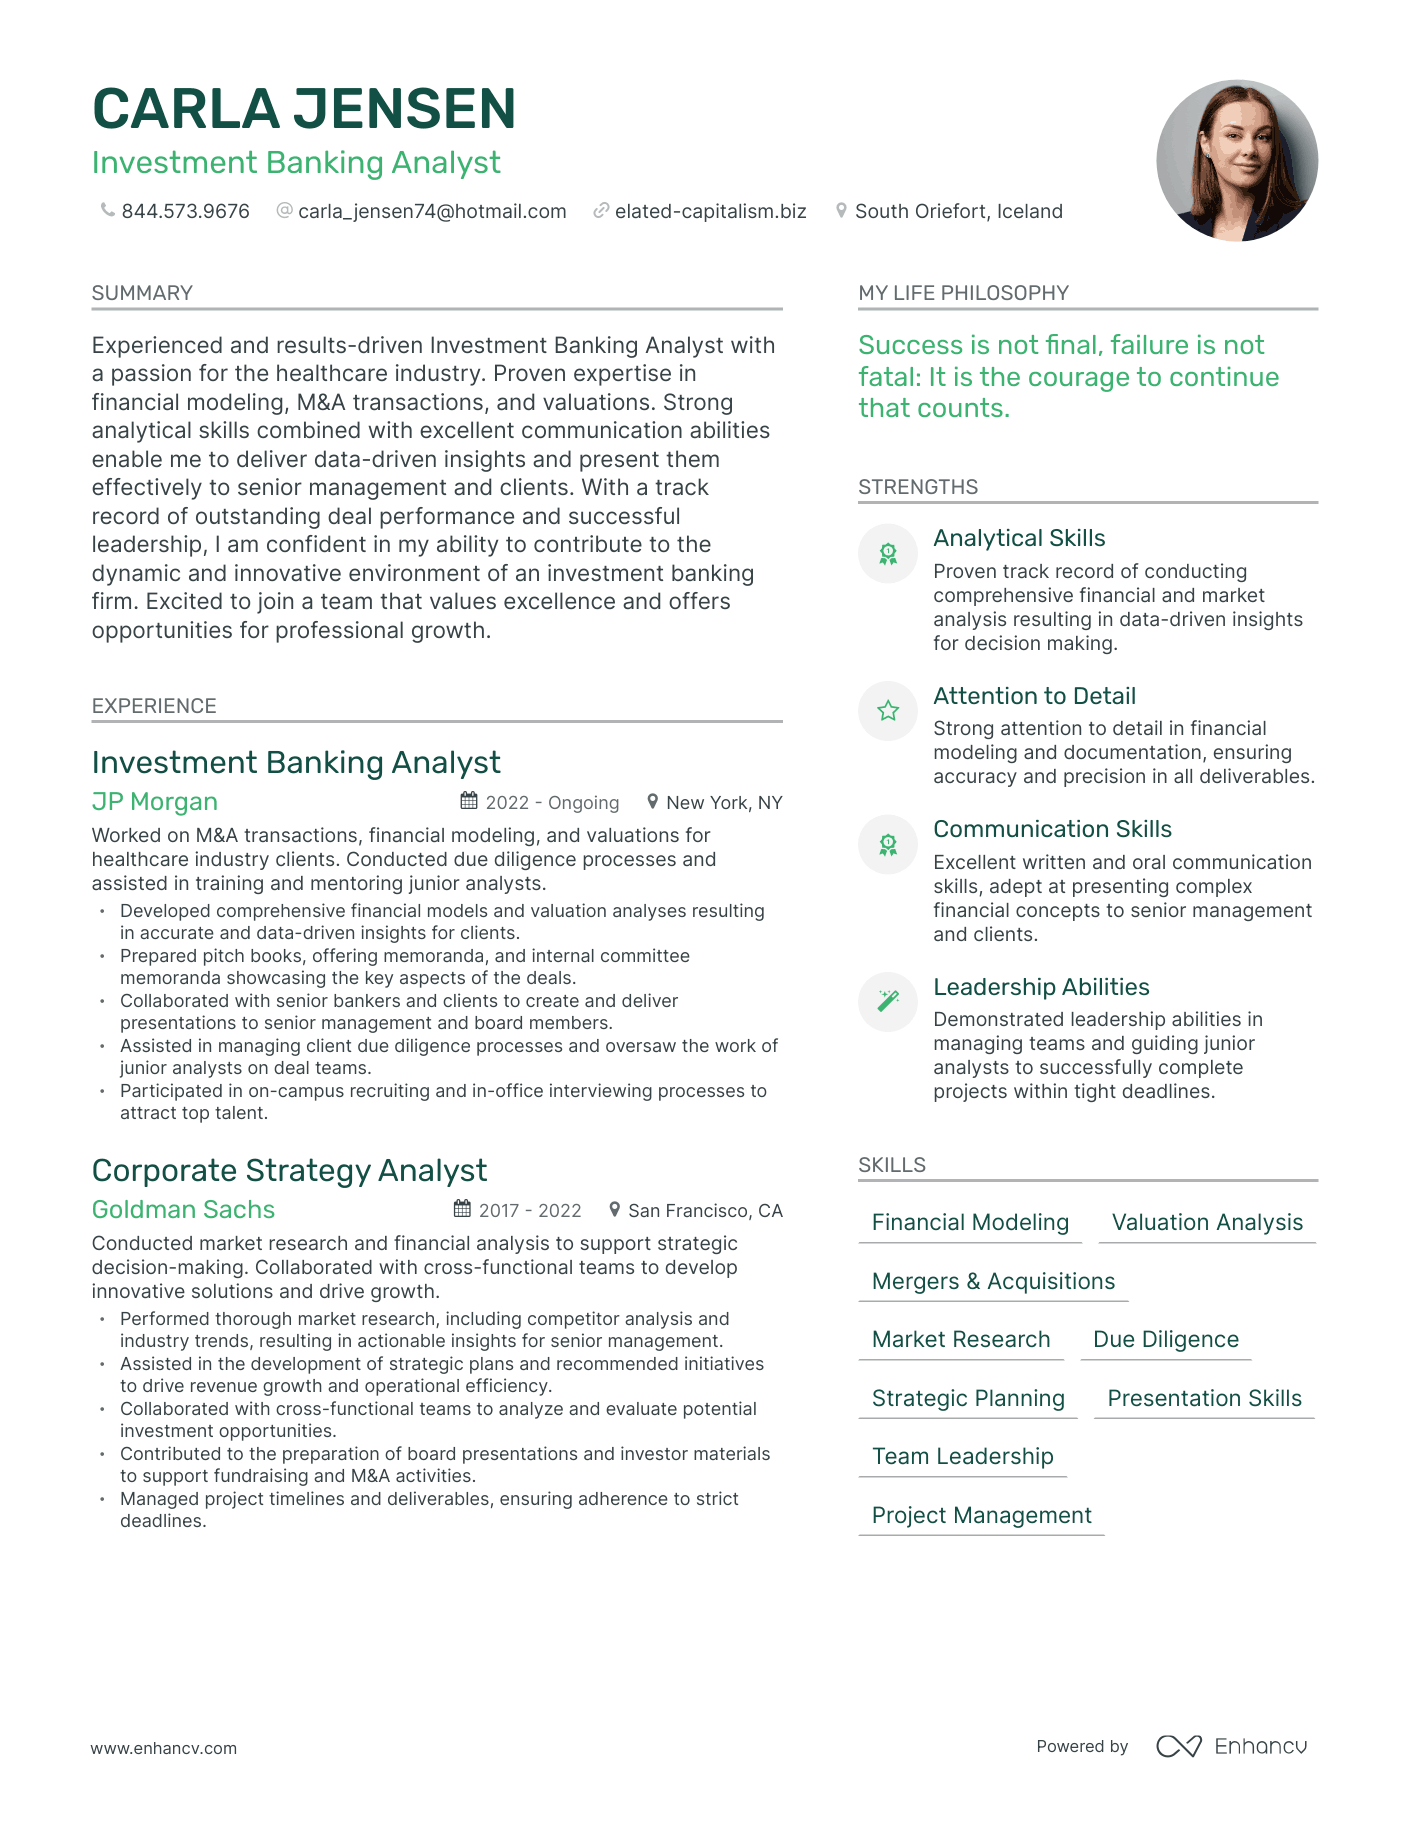 Investment Banking Analyst resume example